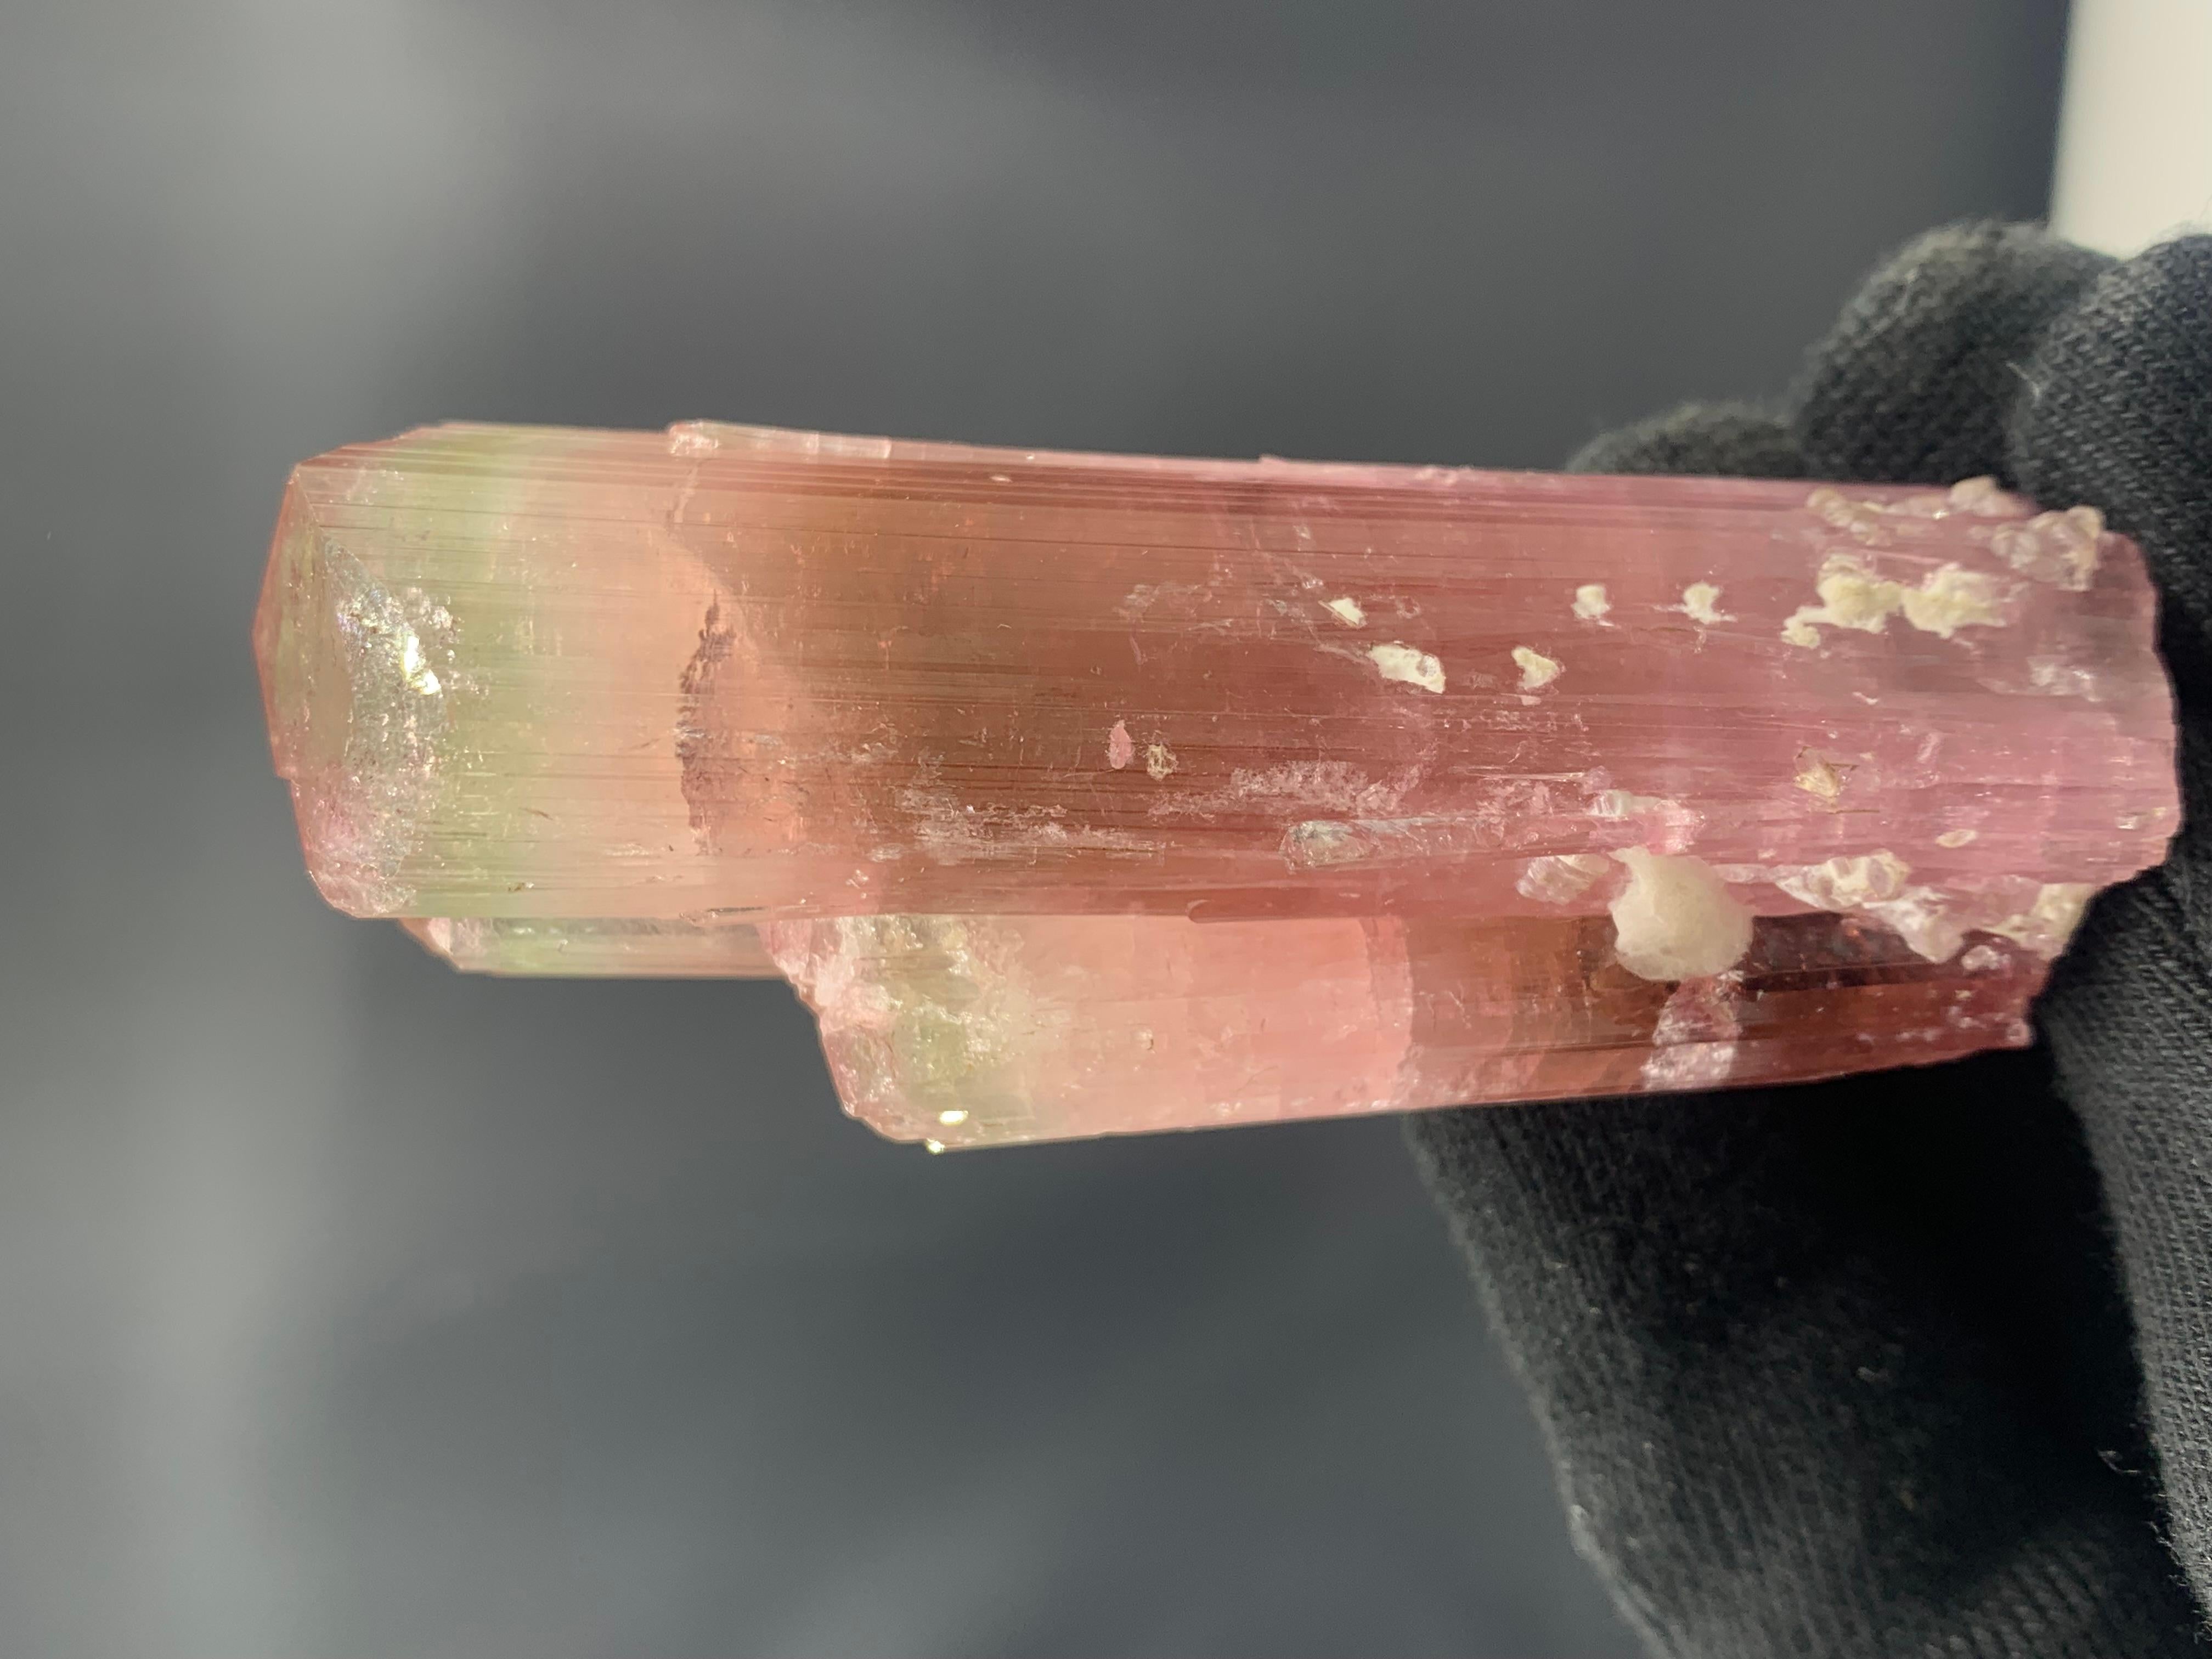 Stunning Bi-Color Tourmaline Crystal From Afghanistan
WEIGHT: 111.33 grams
DIMENSIONS: 8.4 x 3.3 x 2.8 Cm
ORIGIN: Kunar, Afghanistan
TREATMENT: None

Tourmaline is an extremely popular gemstone; the name Tourmaline is derived from Turamali,